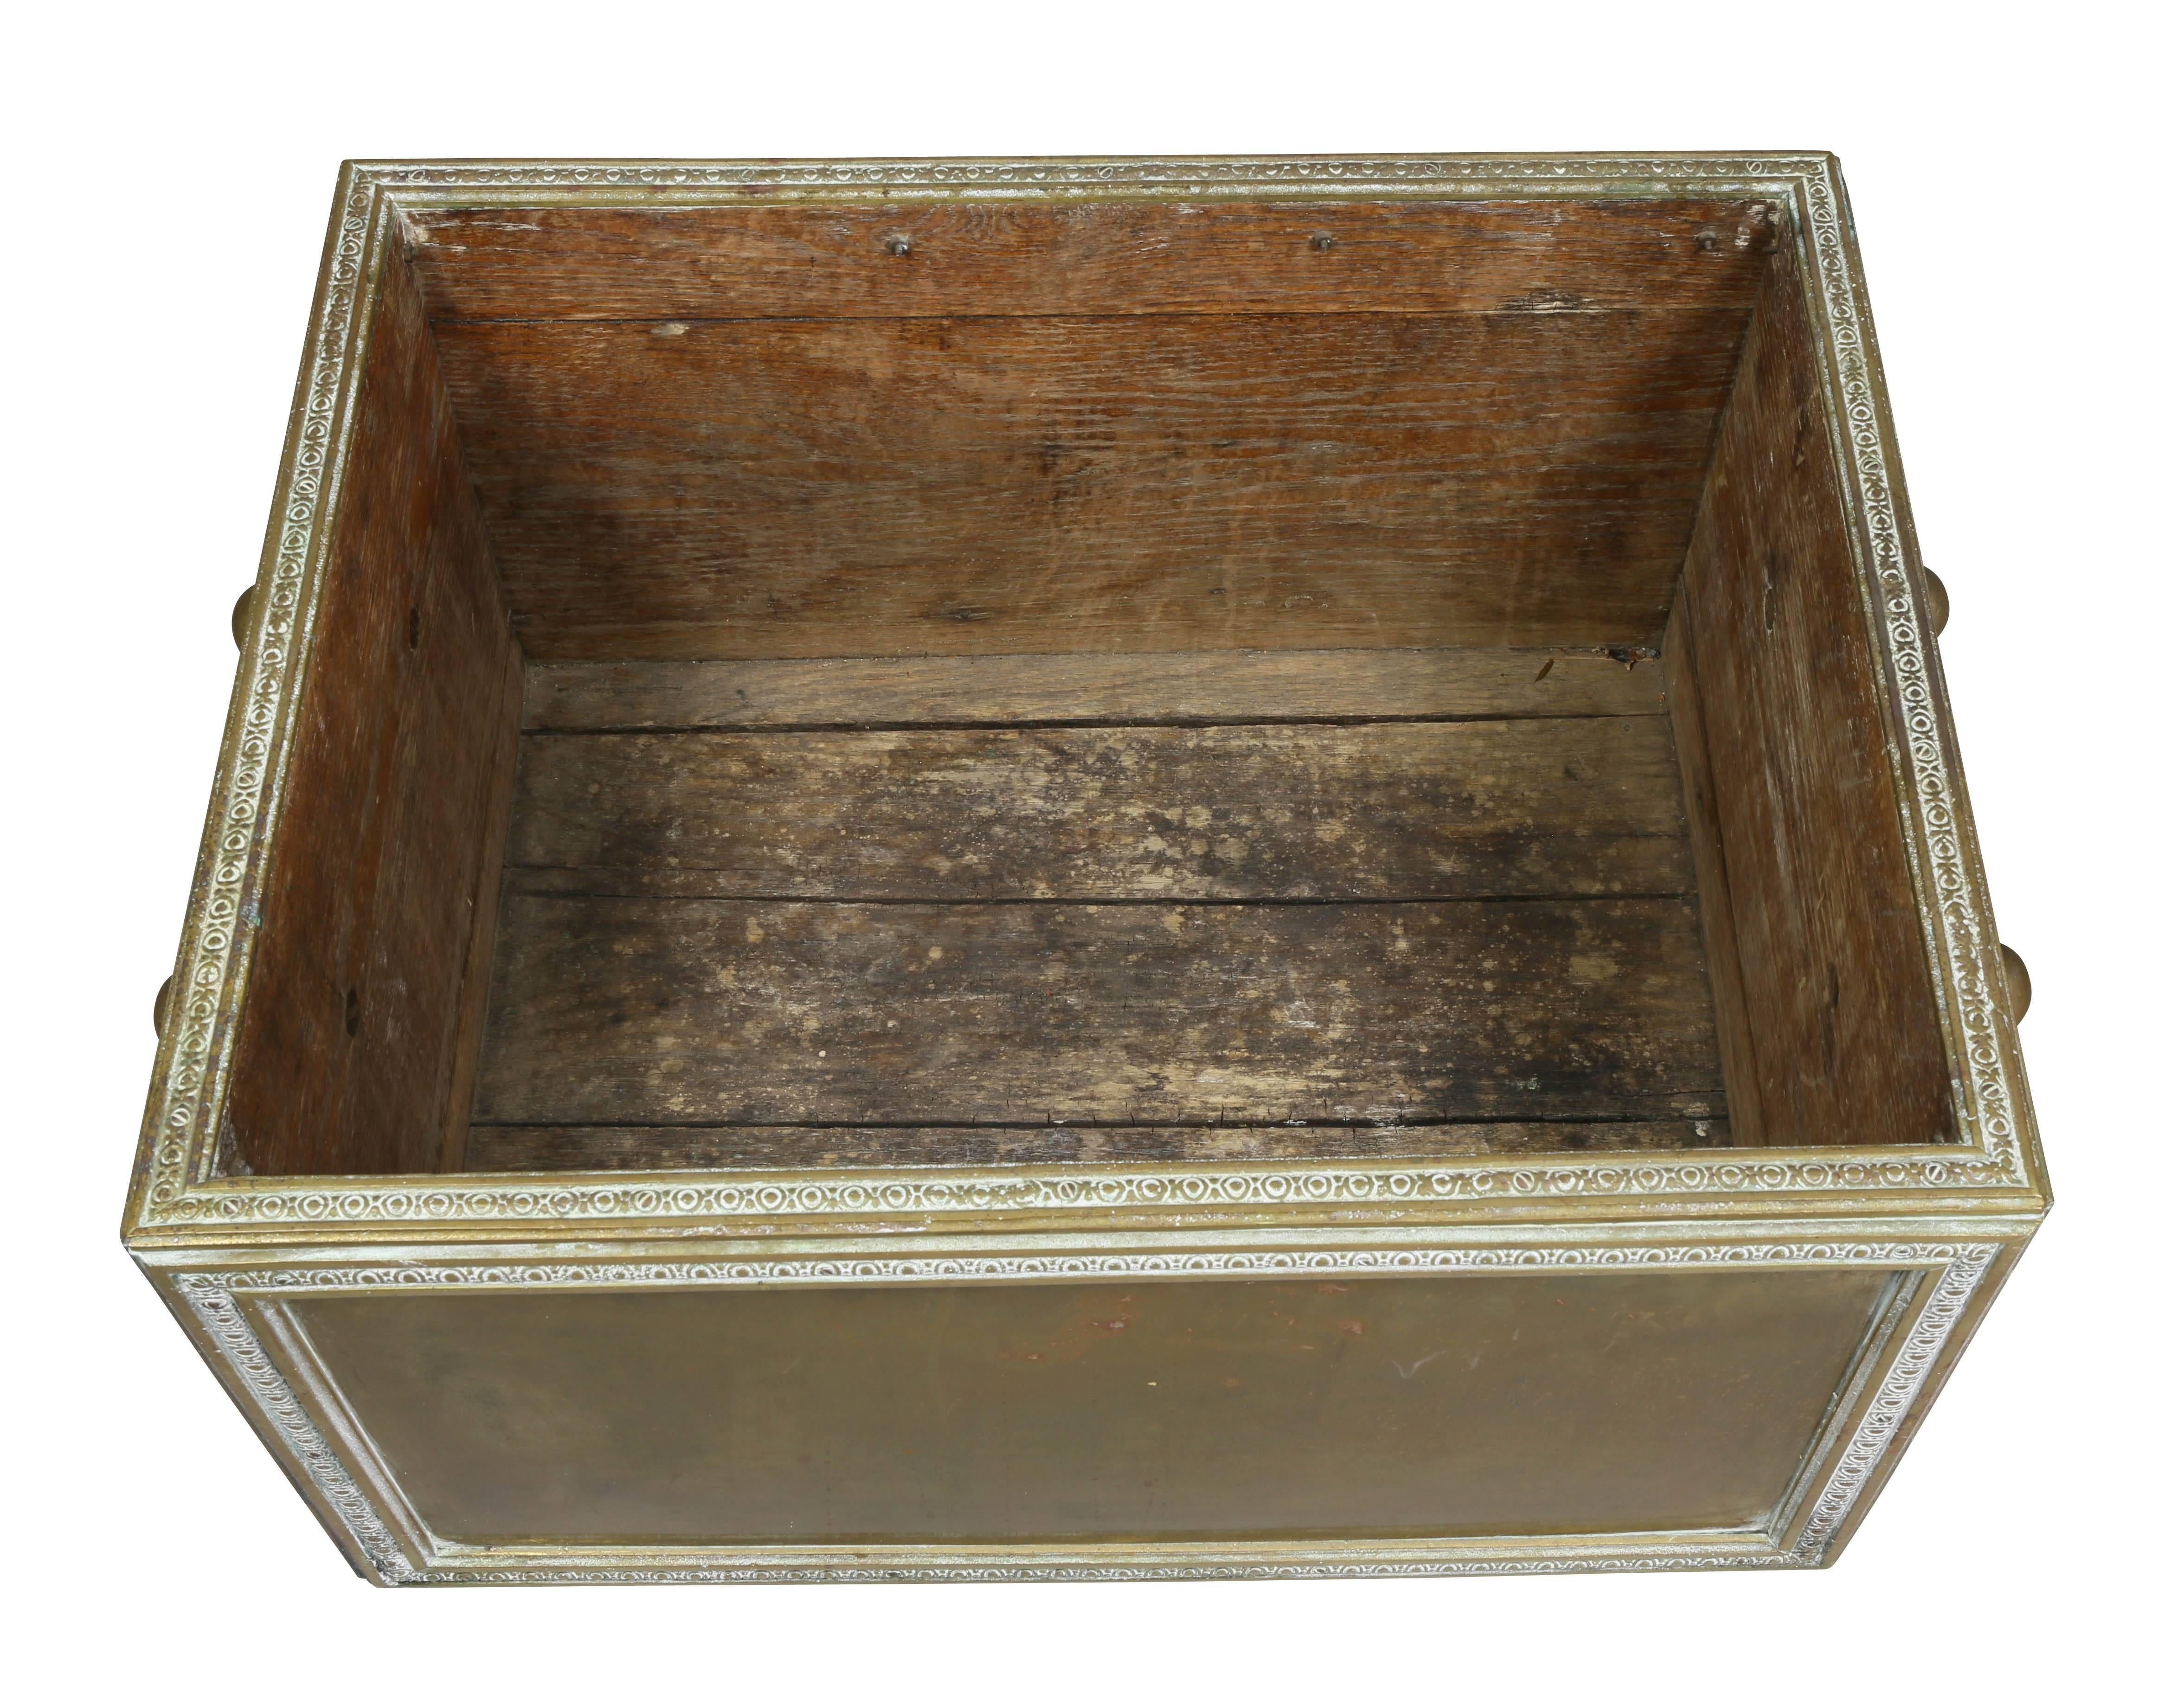 Late Victorian Large Victorian Brass Wood Bin or Planter